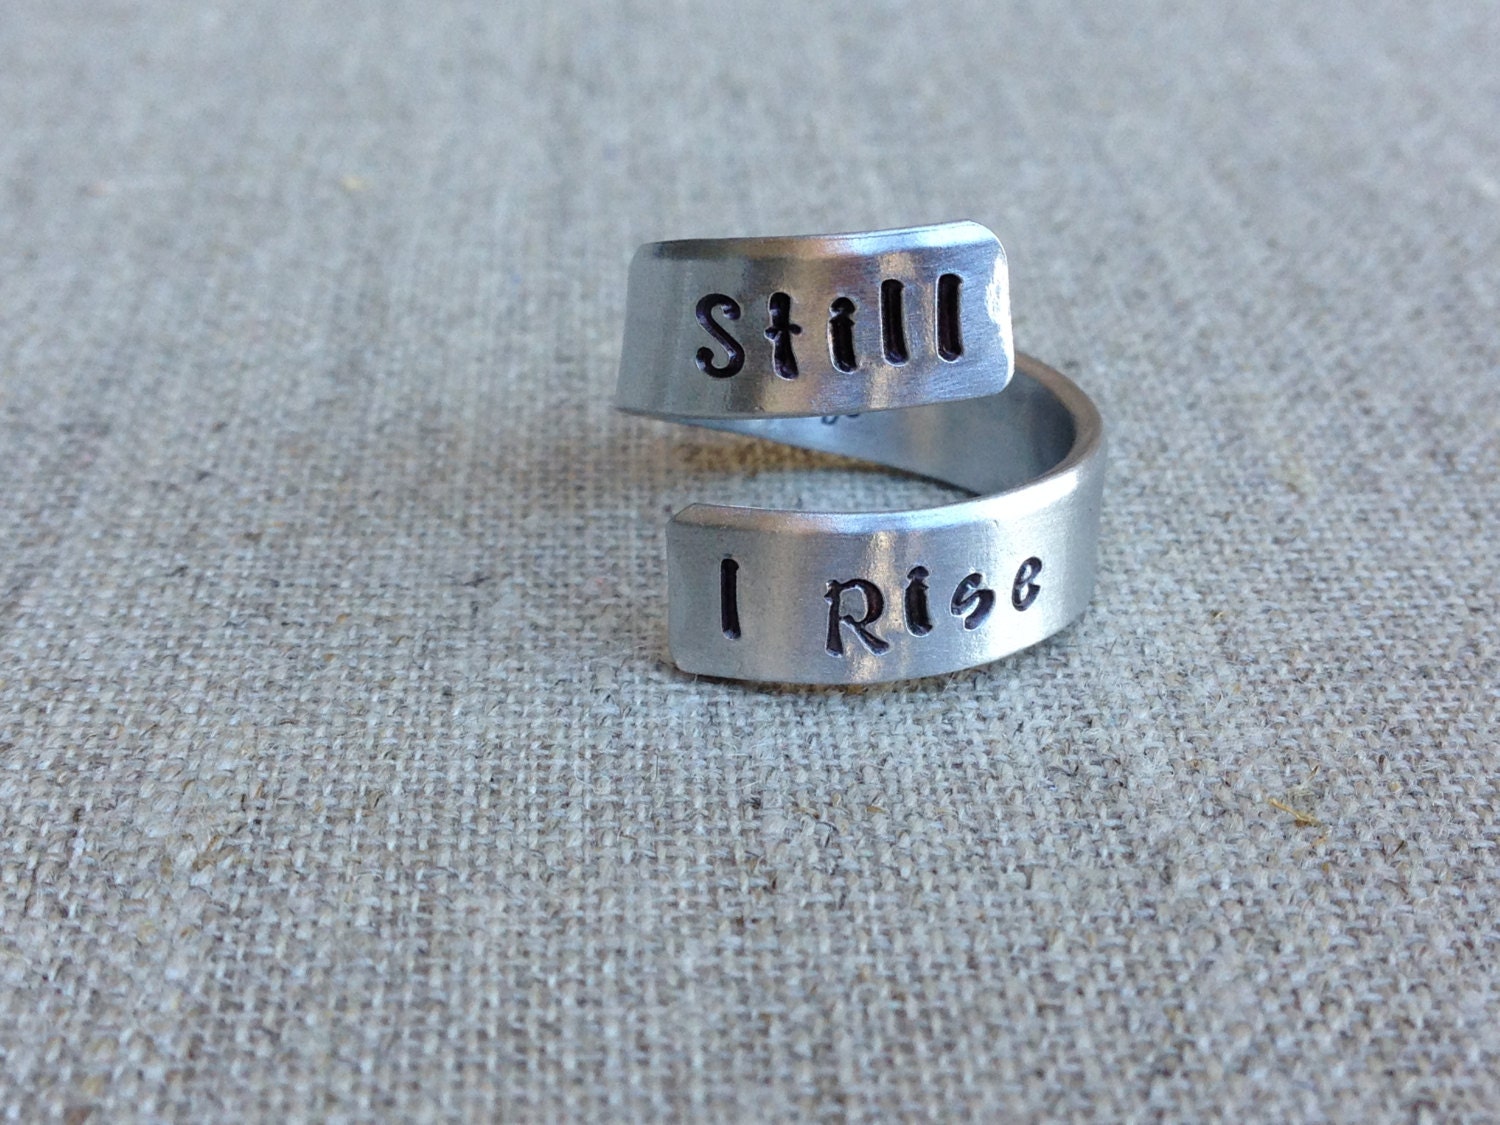 Still I Rise Wrap Ring | Personalized Ring | Gift for Her | Unique Gift | Hand Stamped Ring | Inspiration Ring | Hand Stamped Ring